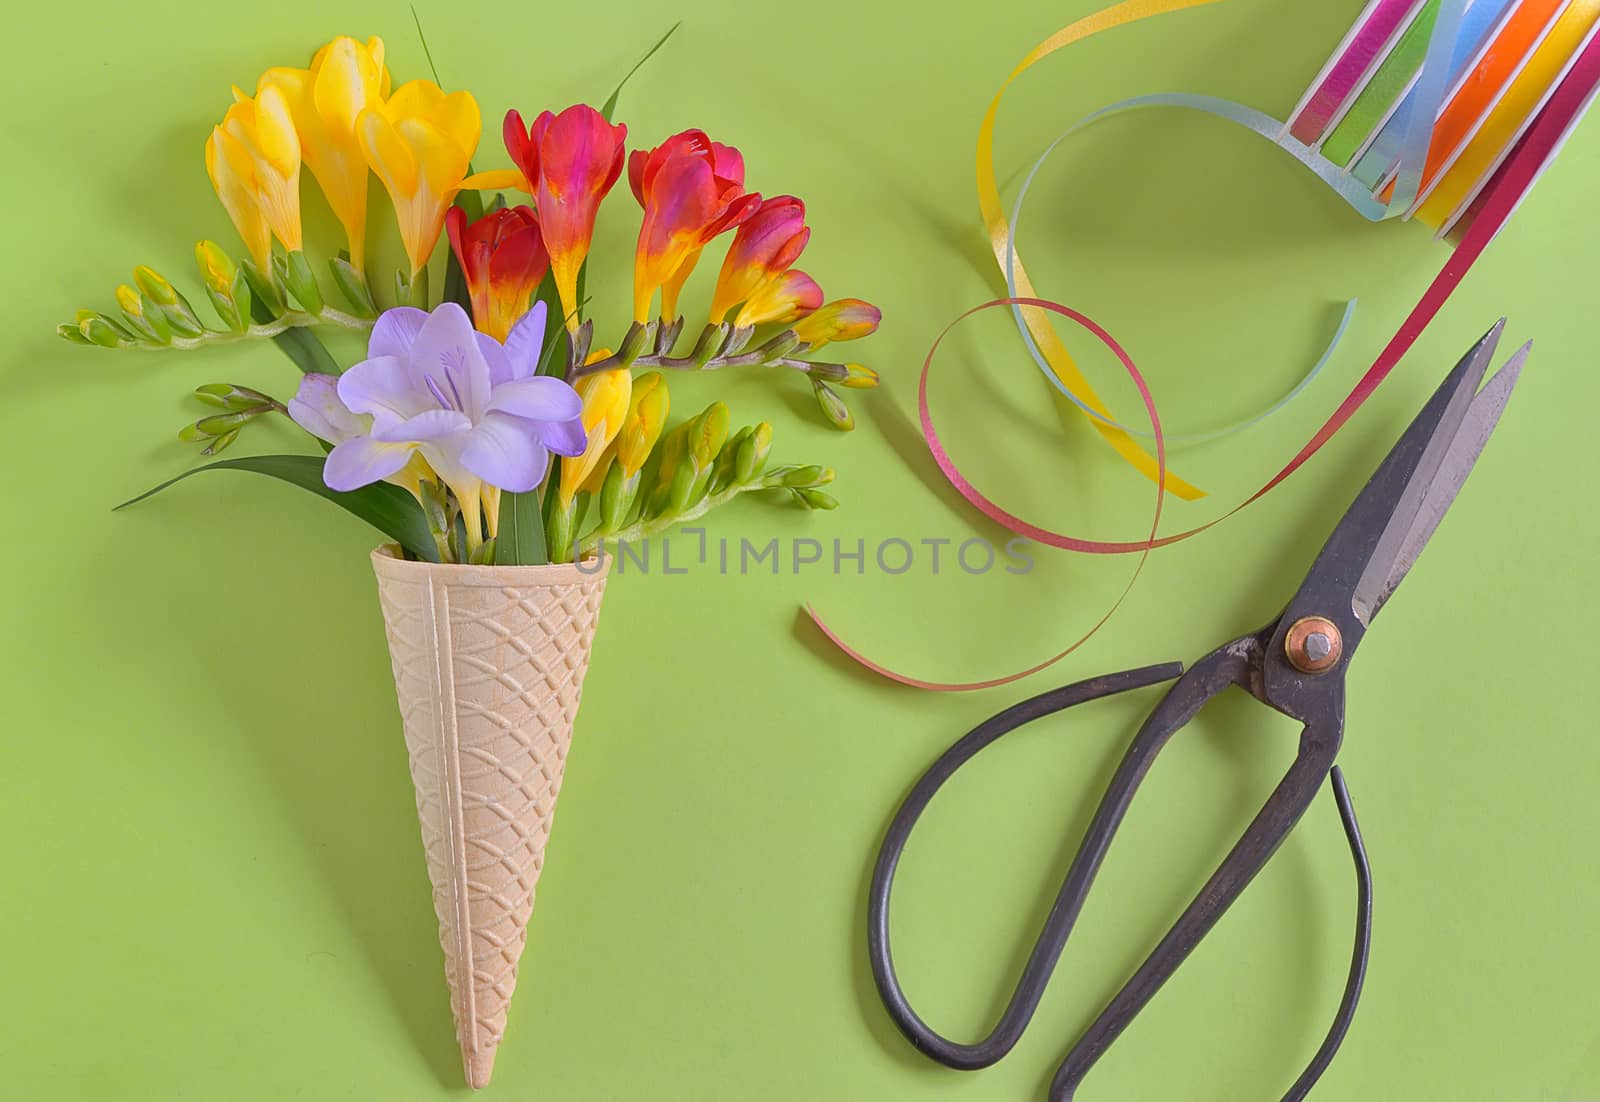 Freesias flowers in ice cream waffles and vintage scissors